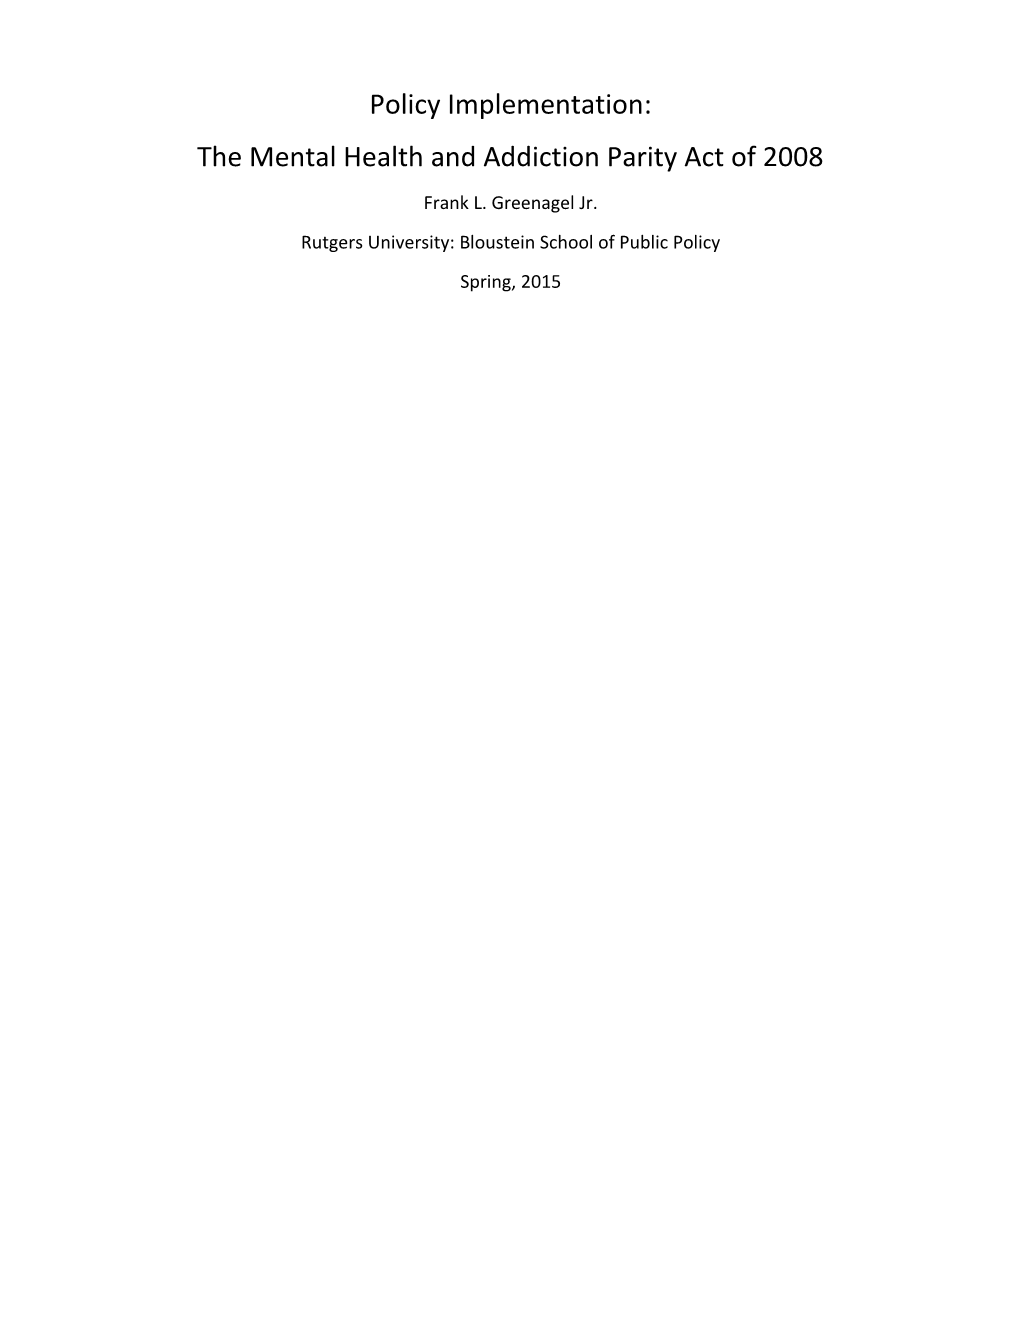 Policy Implementation: the Mental Health and Addiction Parity Act of 20081